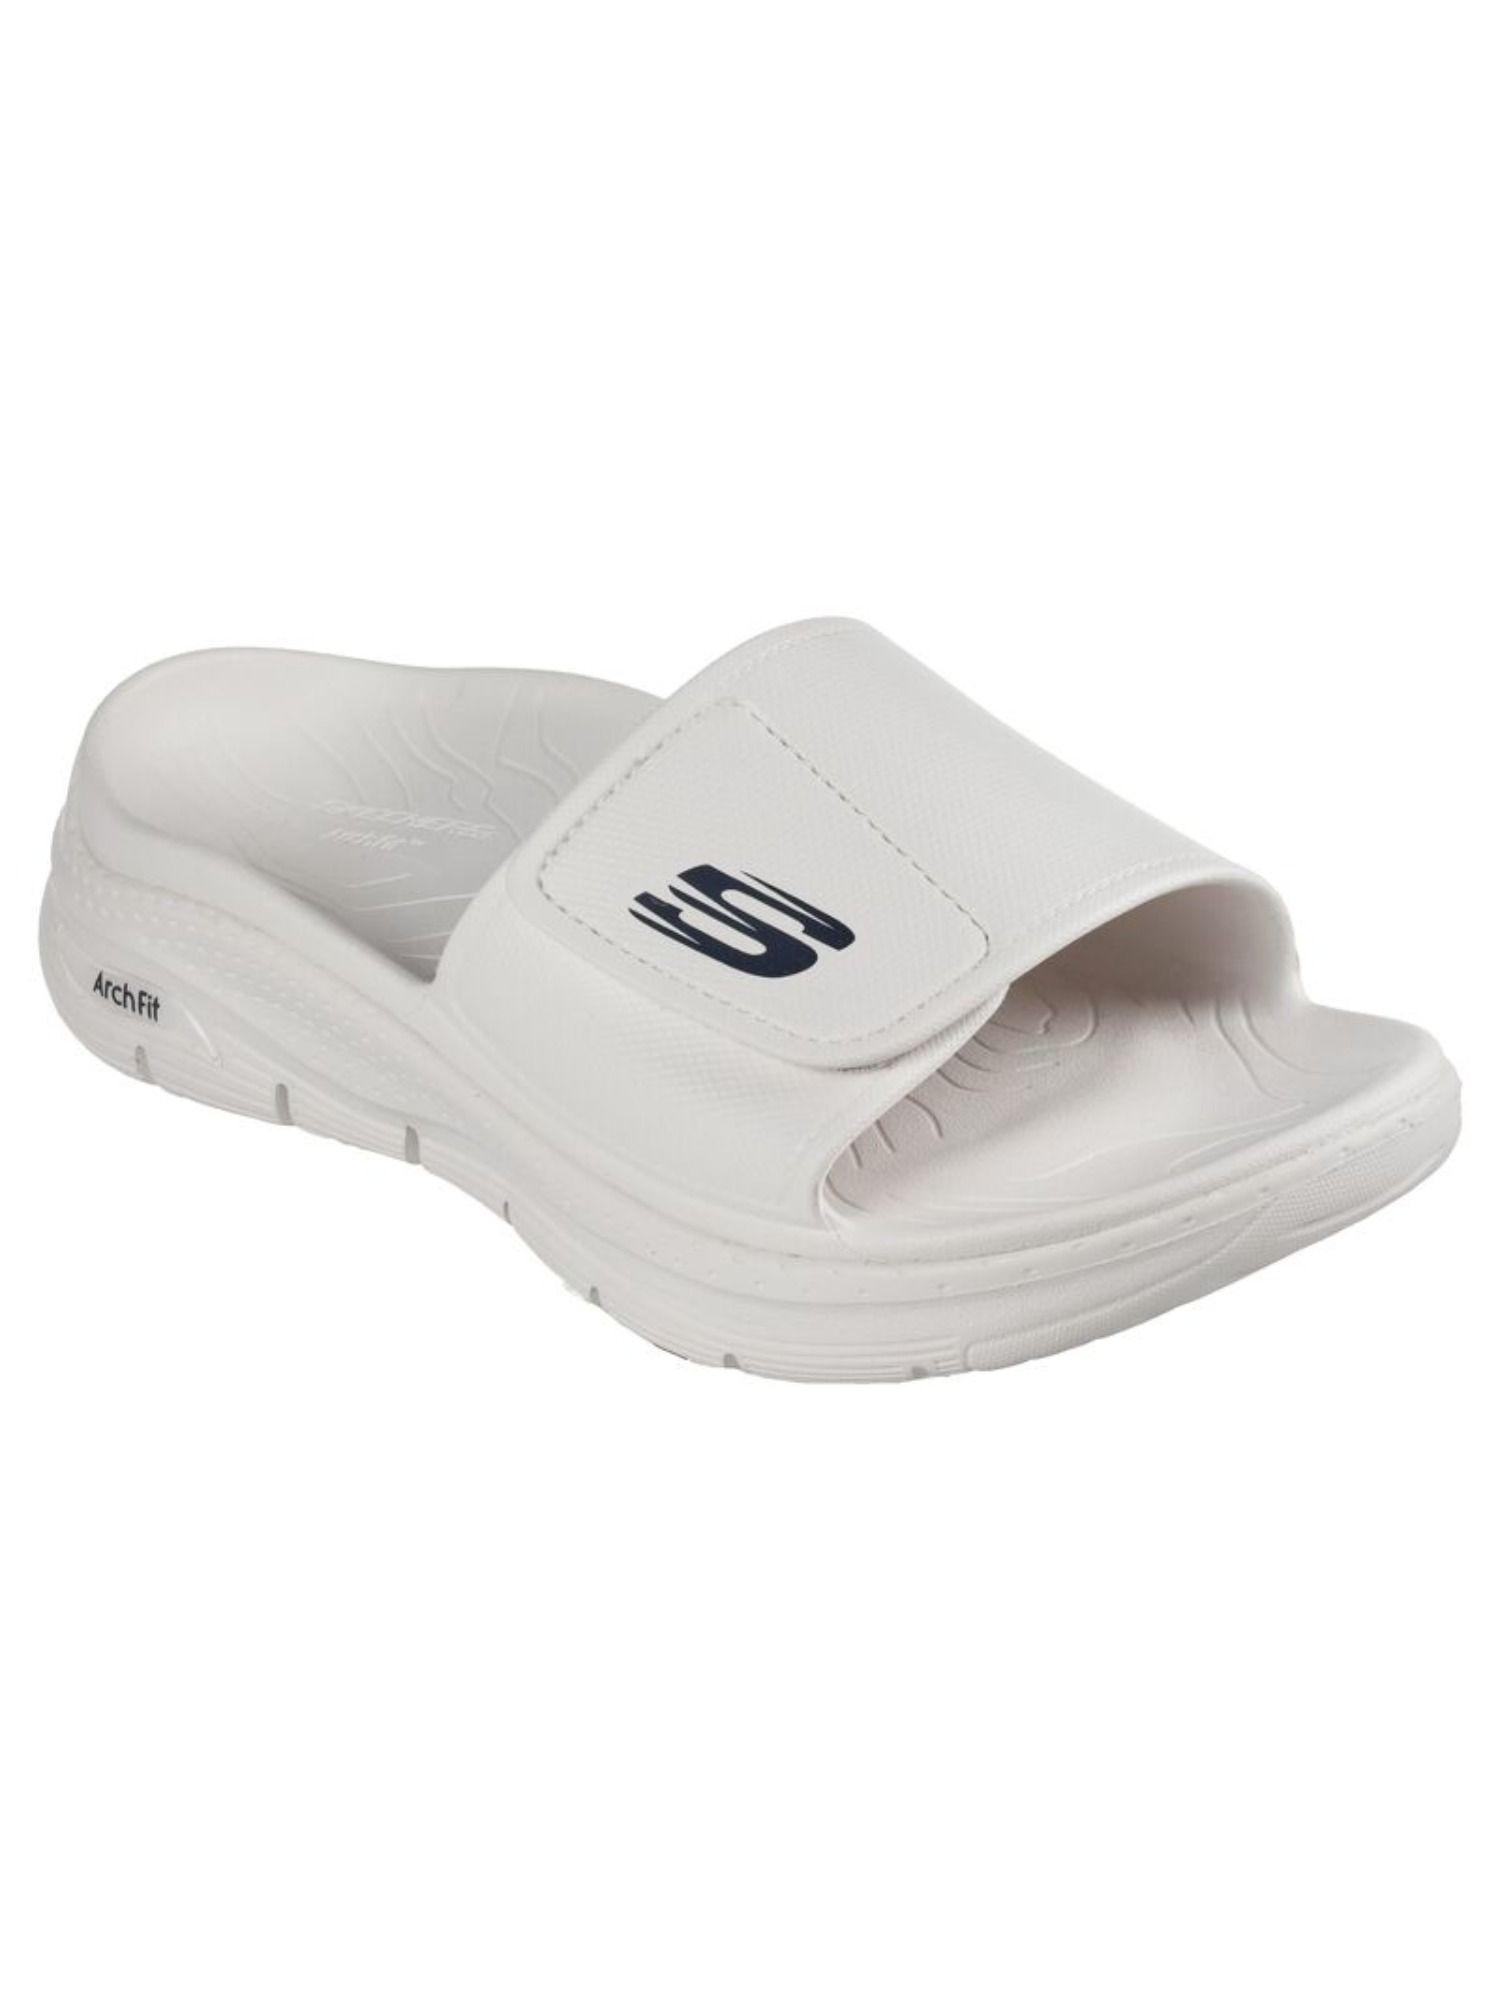 arch-fit-white-arch-fit-sliders